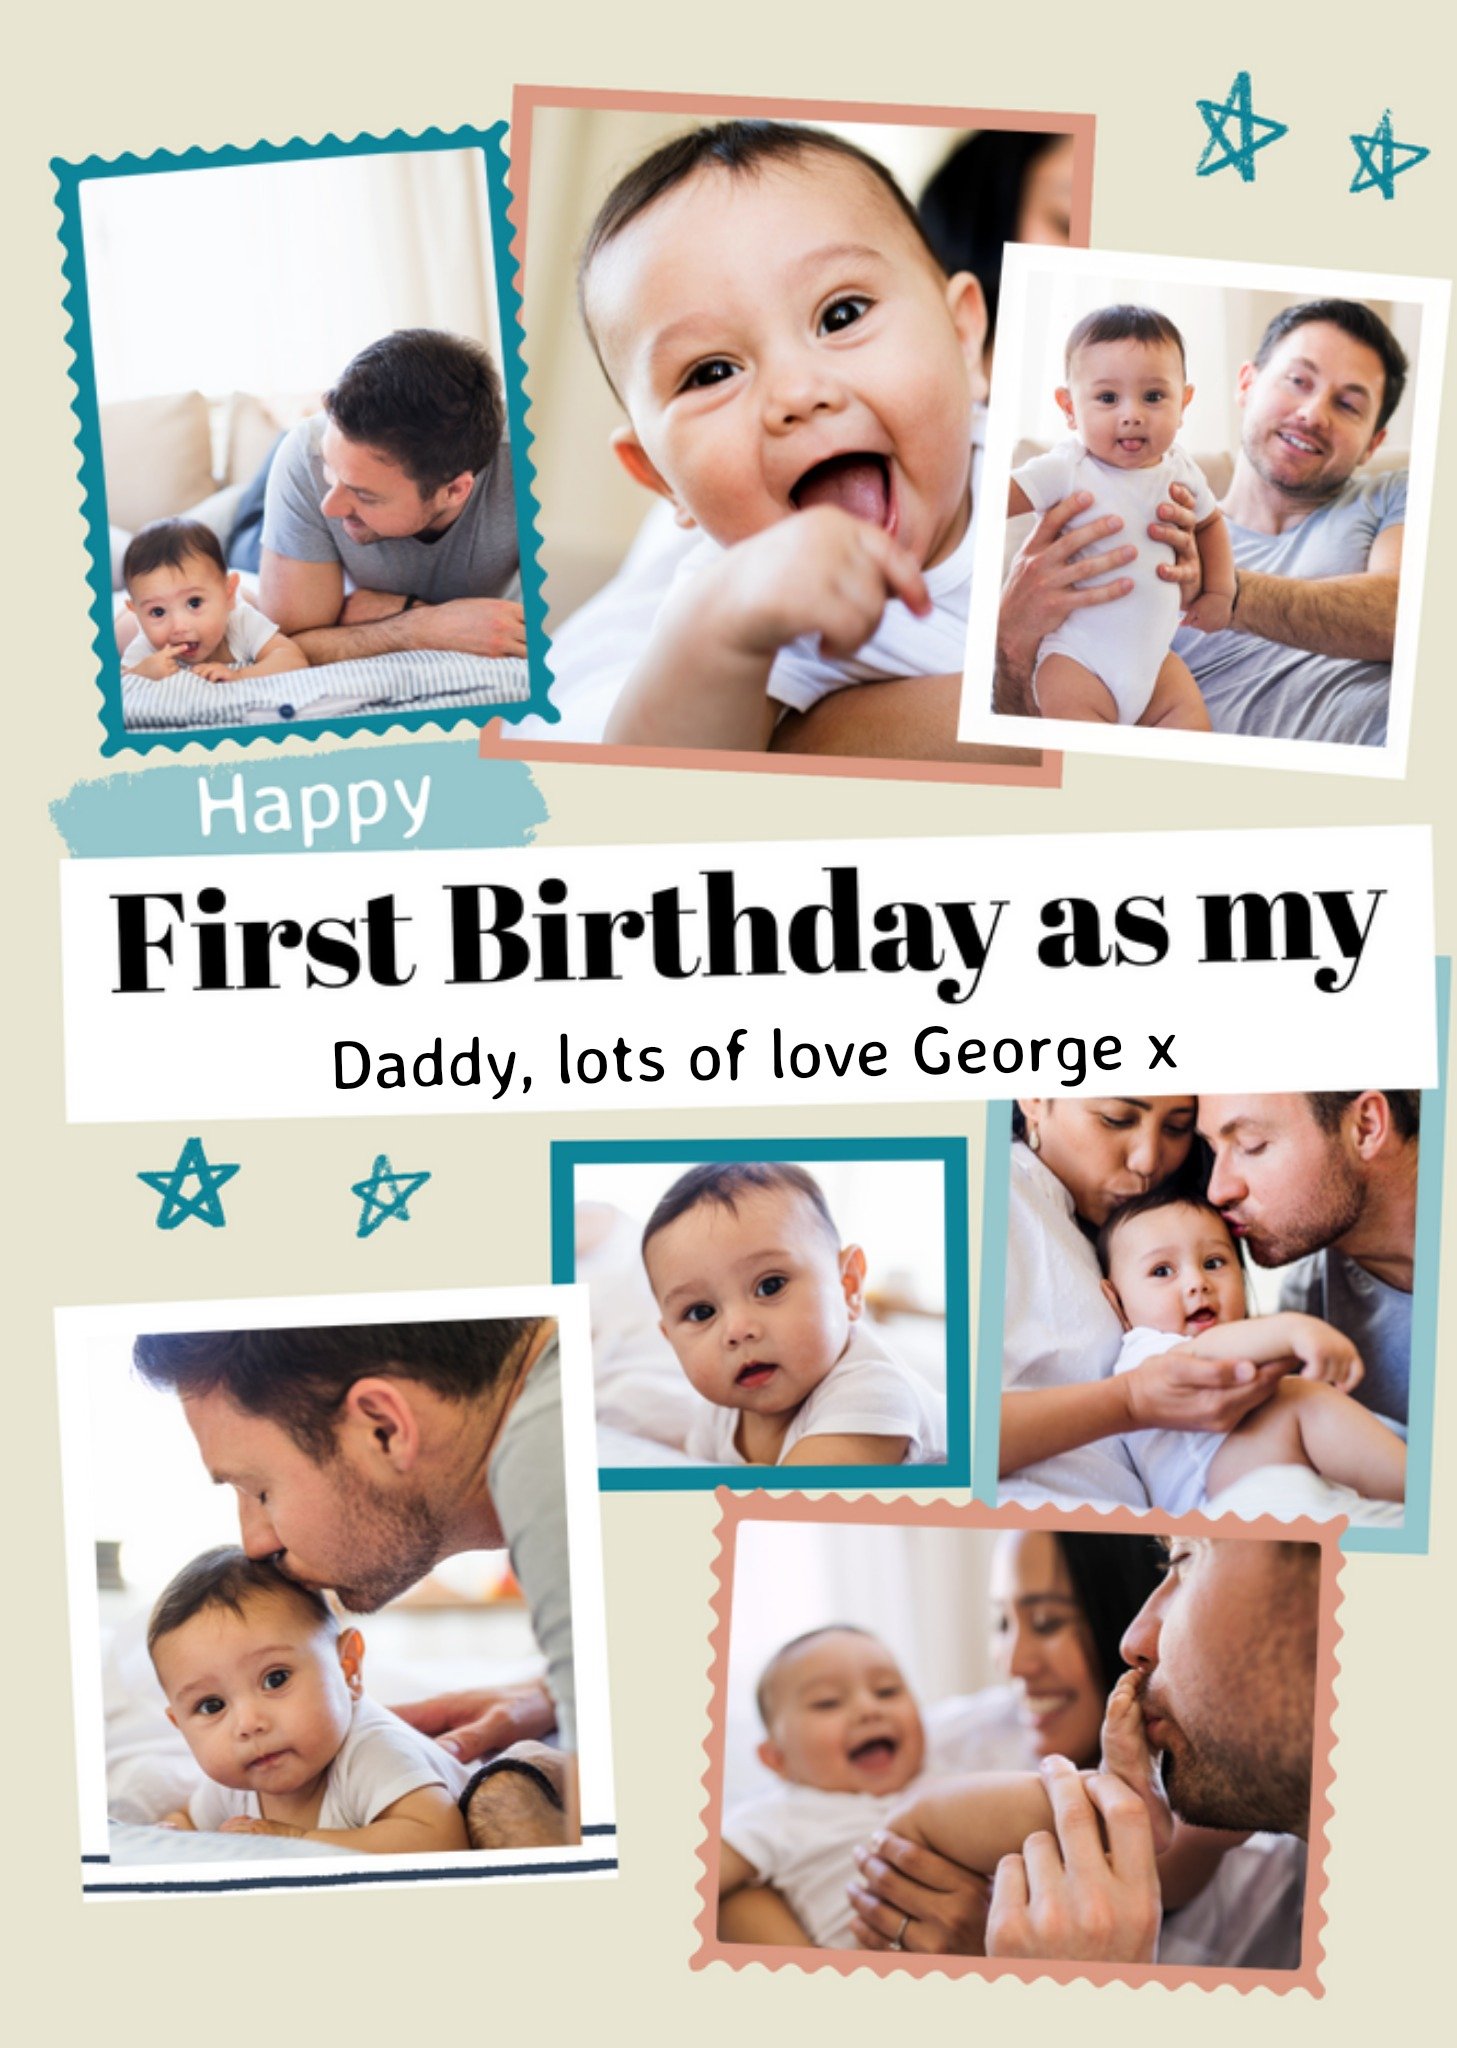 Moonpig Loving First Birthday As My Dad Photo Frame Collage Photo Upload Birthday Card, Large